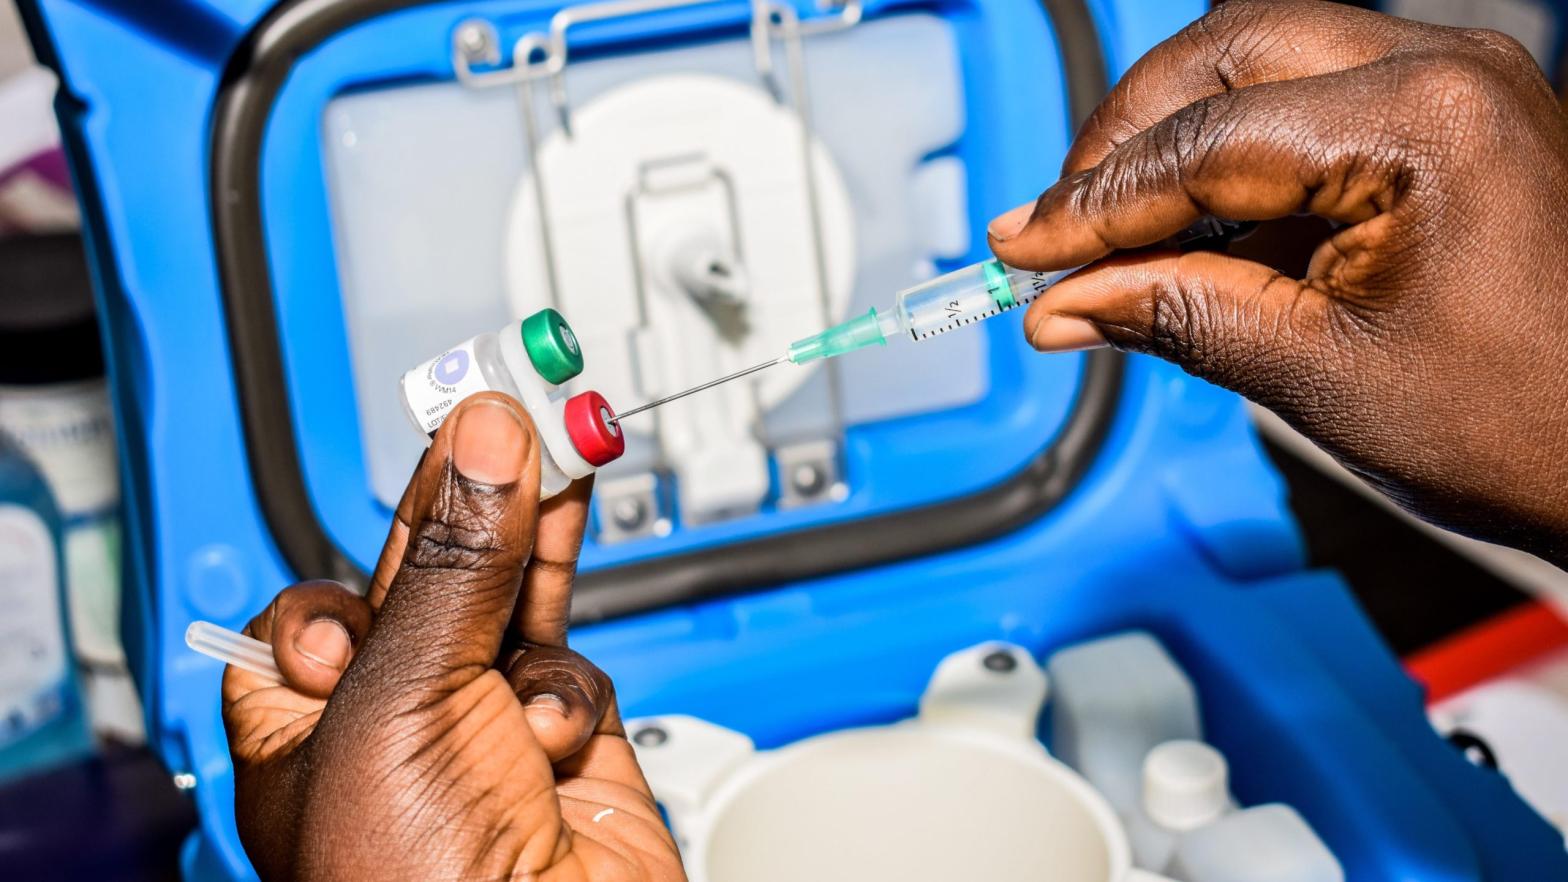 A health worker prepares a dose of the Mosquirix malaria vaccine in Ndhiwa, Homabay County, western Kenya on September 13, 2019. (Photo: Brian Ongoro, Getty Images)